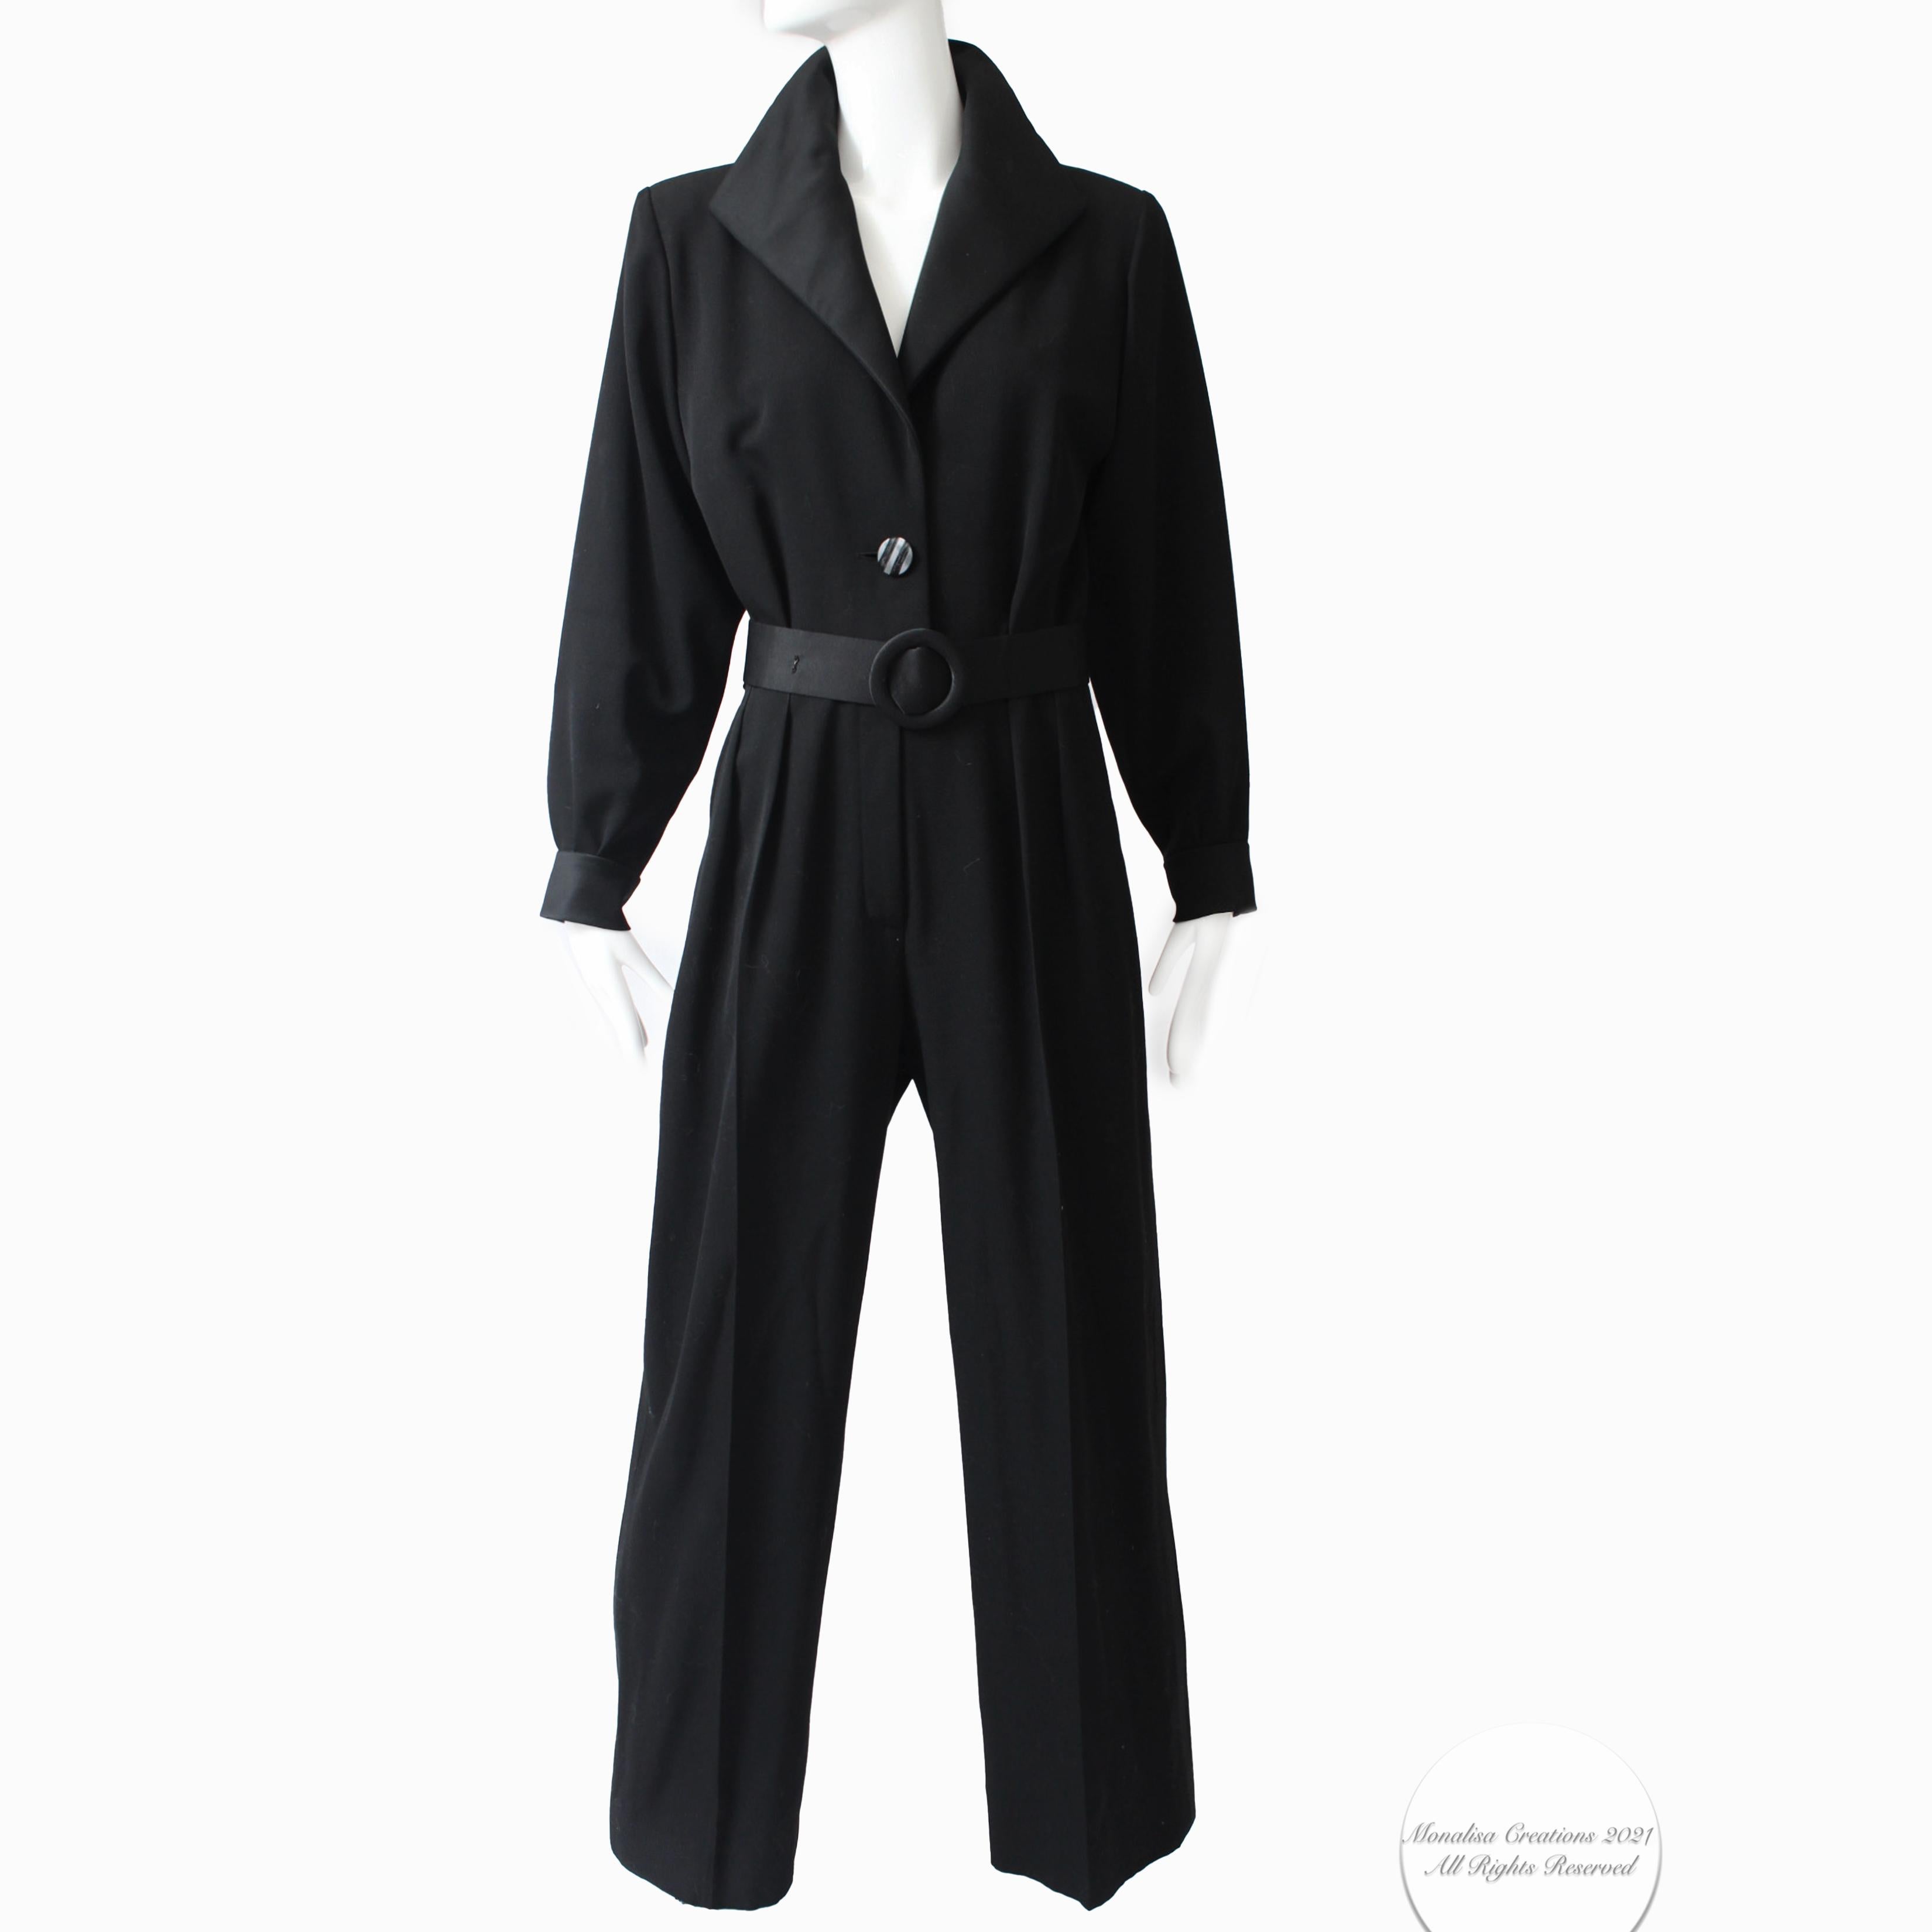 This incredibly chic black jumpsuit was made by Yves Saint Laurent Rive Gauche, most likely in the early 1990s.  Made from wool with silk satin trim, it features YSL's iconic Le Smoking theme in a very sleek jumpsuit with a neckline that can be worn